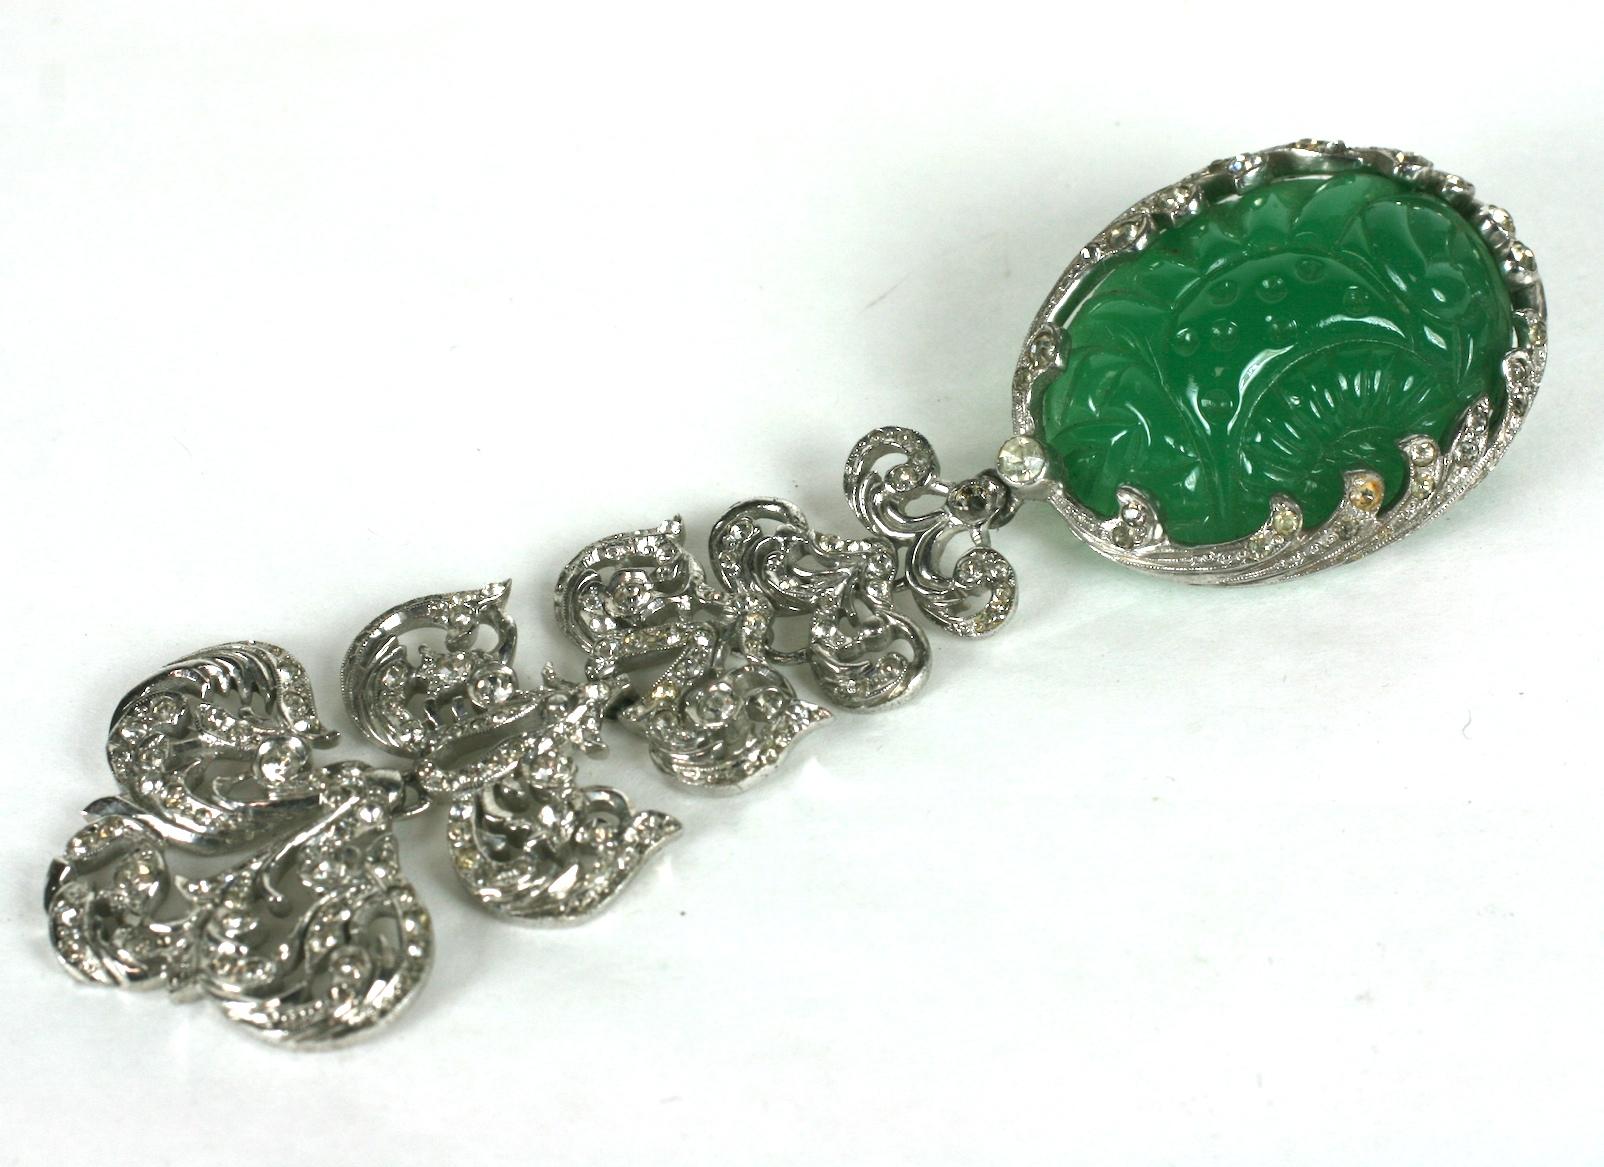 Nettie Rosenstein Art Deco articulated pendant clip brooch of rhodium plated sterling silver set with crystal rhinestone pave. The brooch top with a large oval faux jade cabochon which is carved and incised, set into a sterling silver and pave